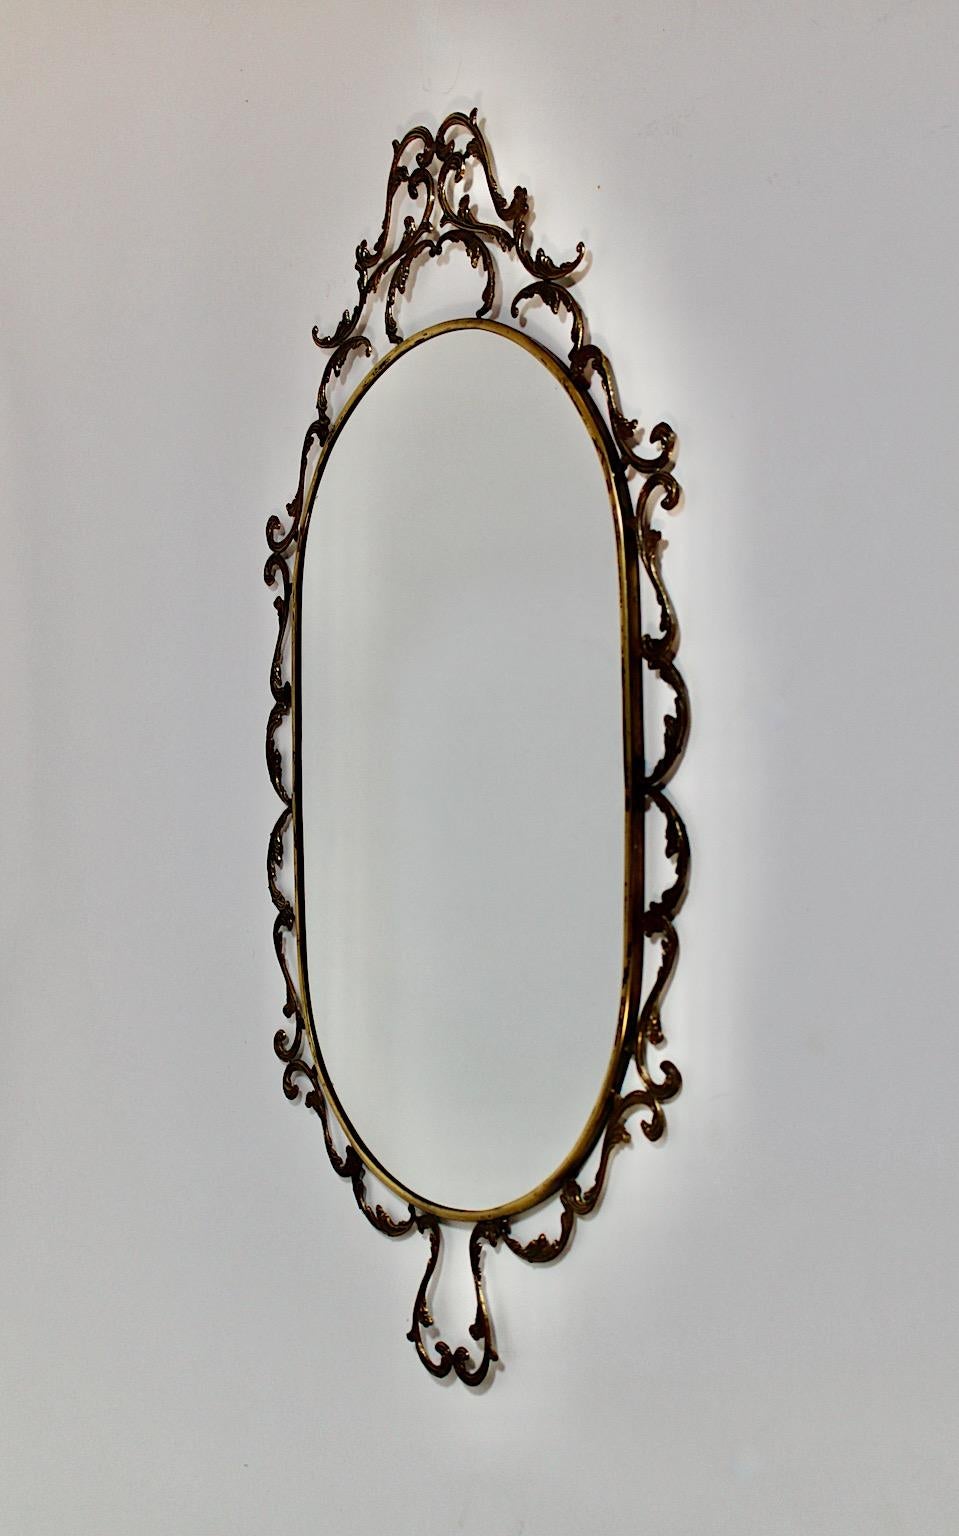 Baroque revival Style vintage oval wall mirror from brass partly blackened 1960s Italy.
A stunning and delicate baroque revival style wall mirror in oval form framed with wonderfully ornaments. This beautiful wall mirror shows an oval like mirror